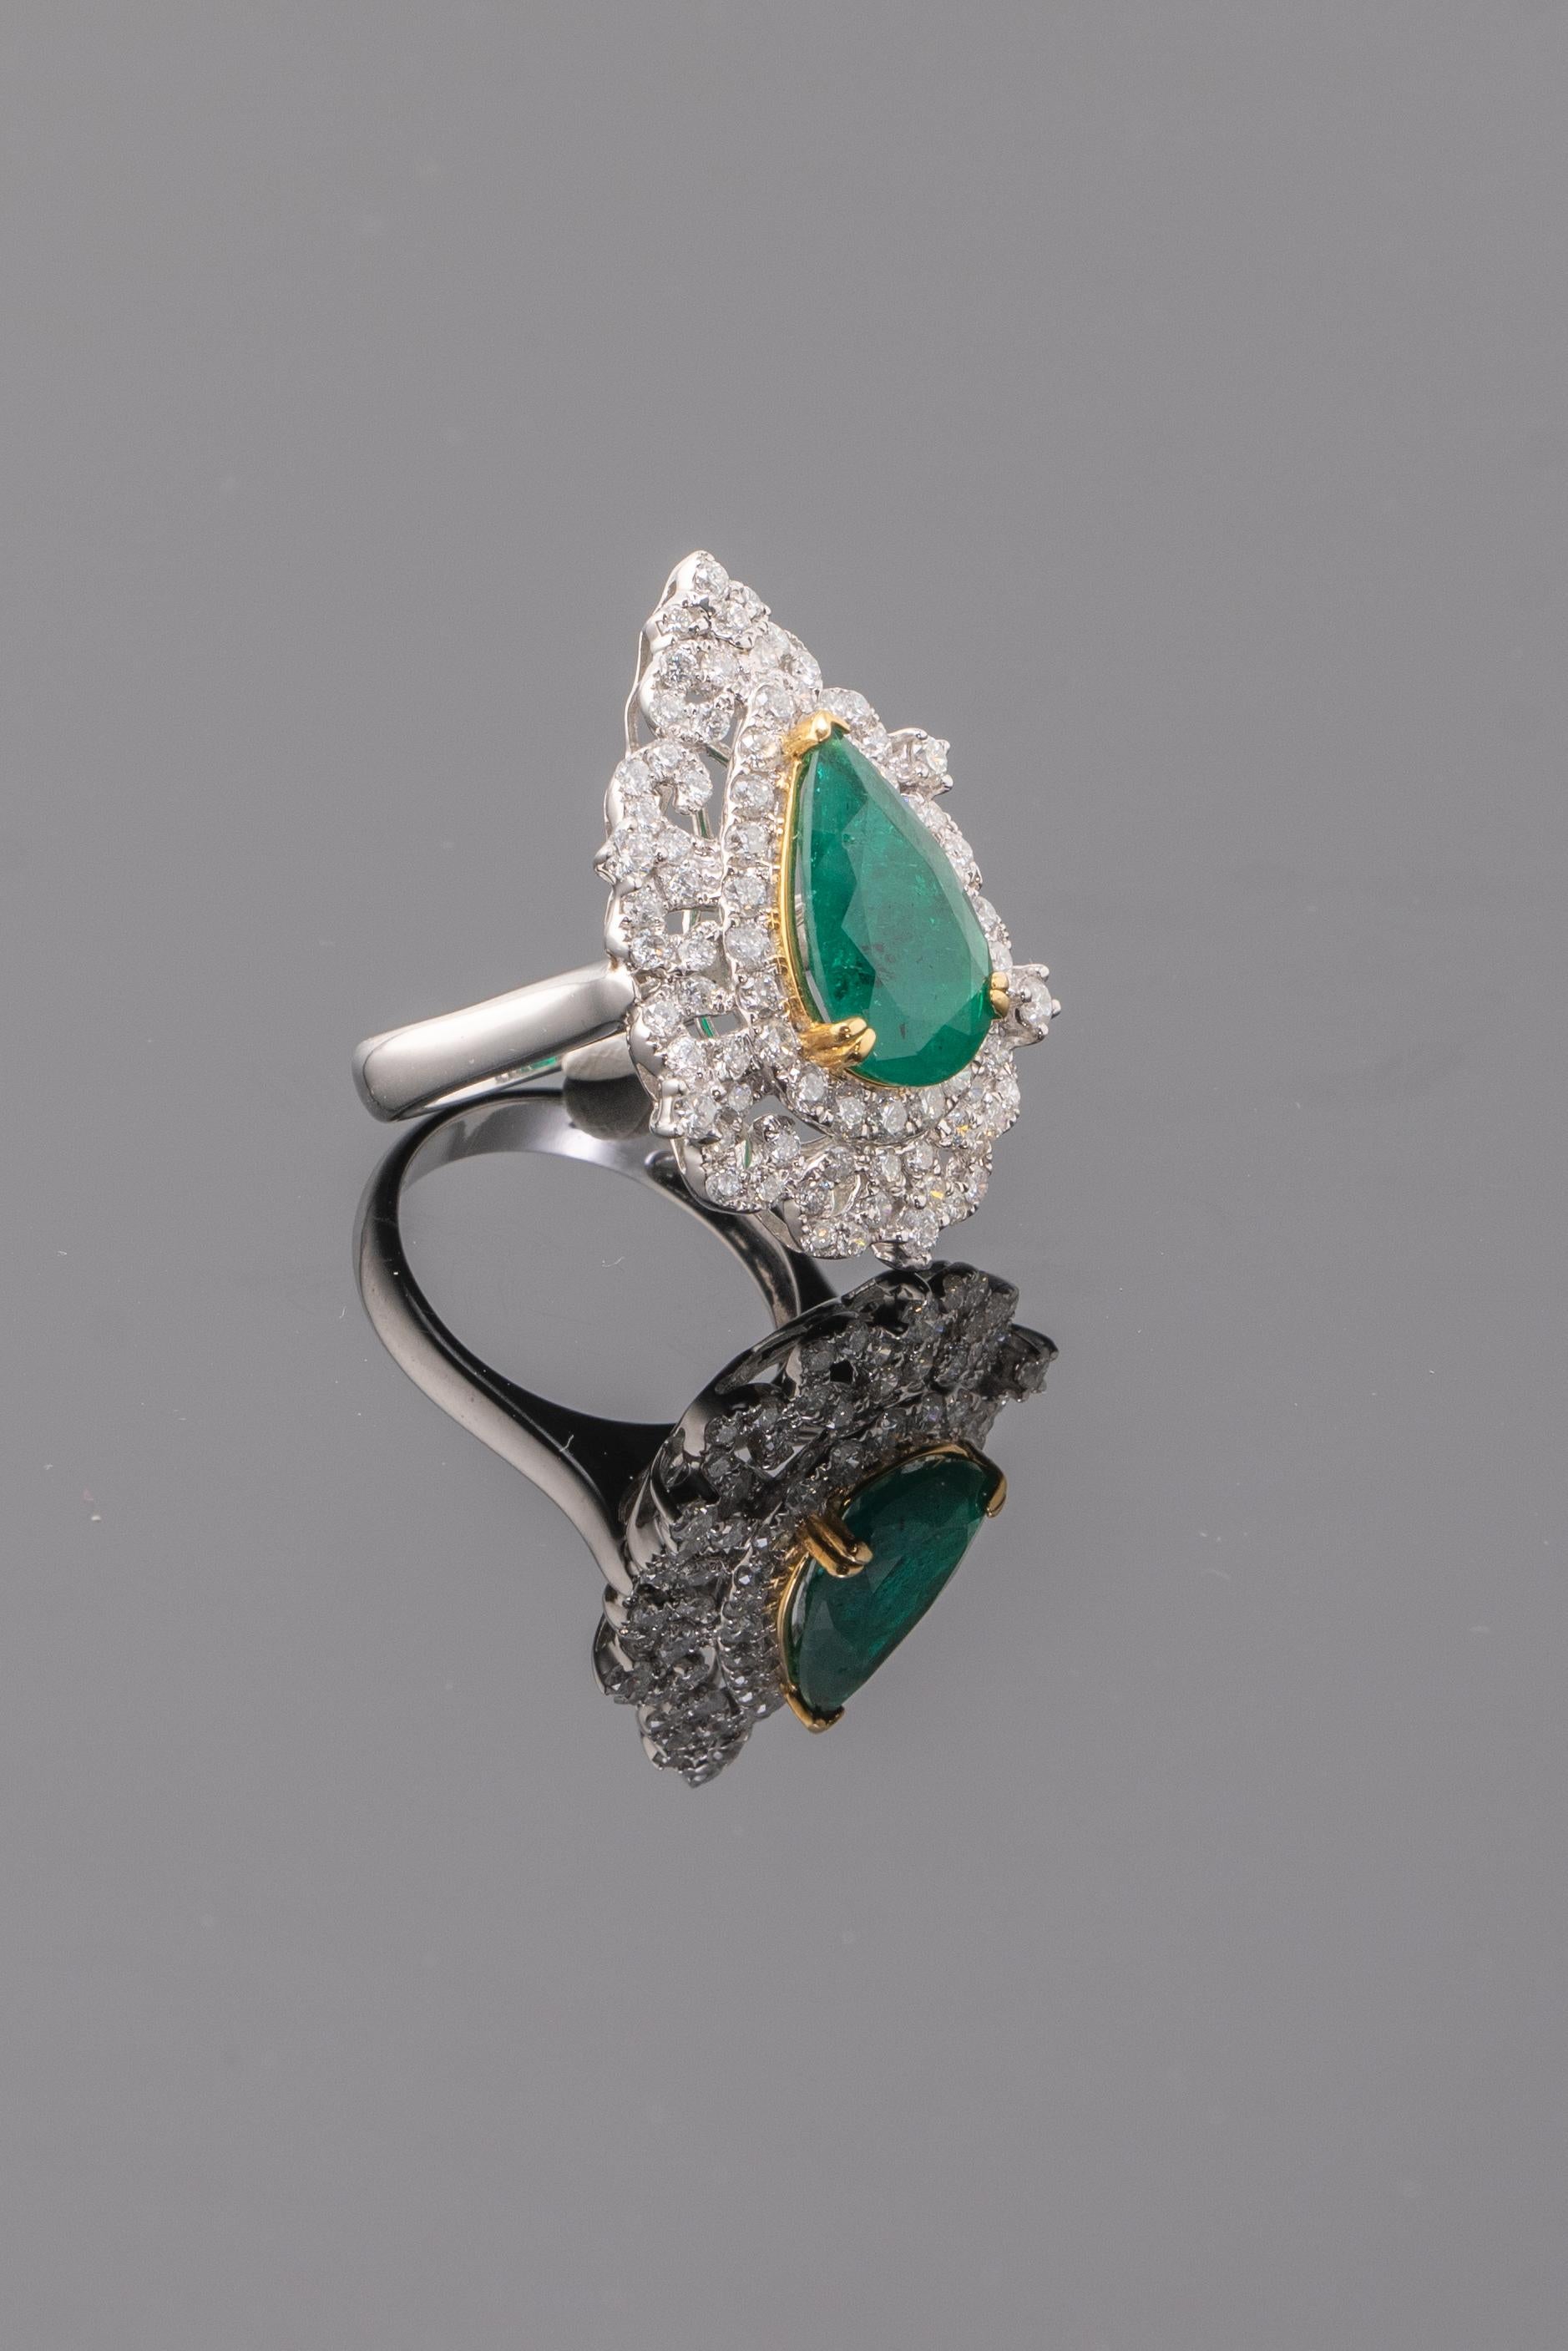 Make a statement with this 3.64 carat pear shape, natural Zambian Emerald ring with 2.30 carat White Diamonds all set in solid 9.68 grams of 18K White Gold. The ring size is currently US 6, we provide free resizing service.
Free shipping provided.